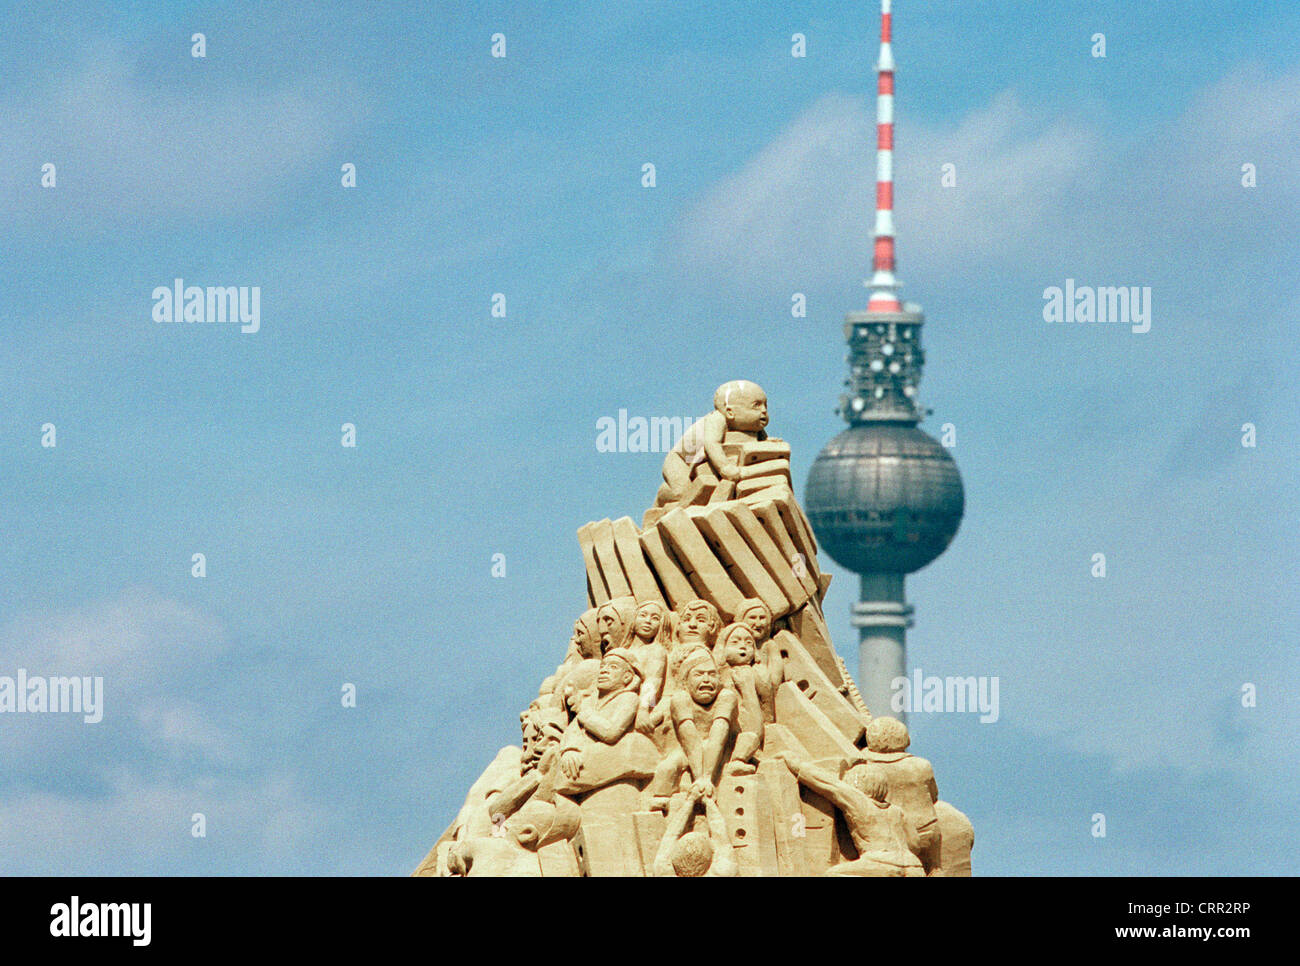 The sand sculpture faces a big city in Berlin Stock Photo